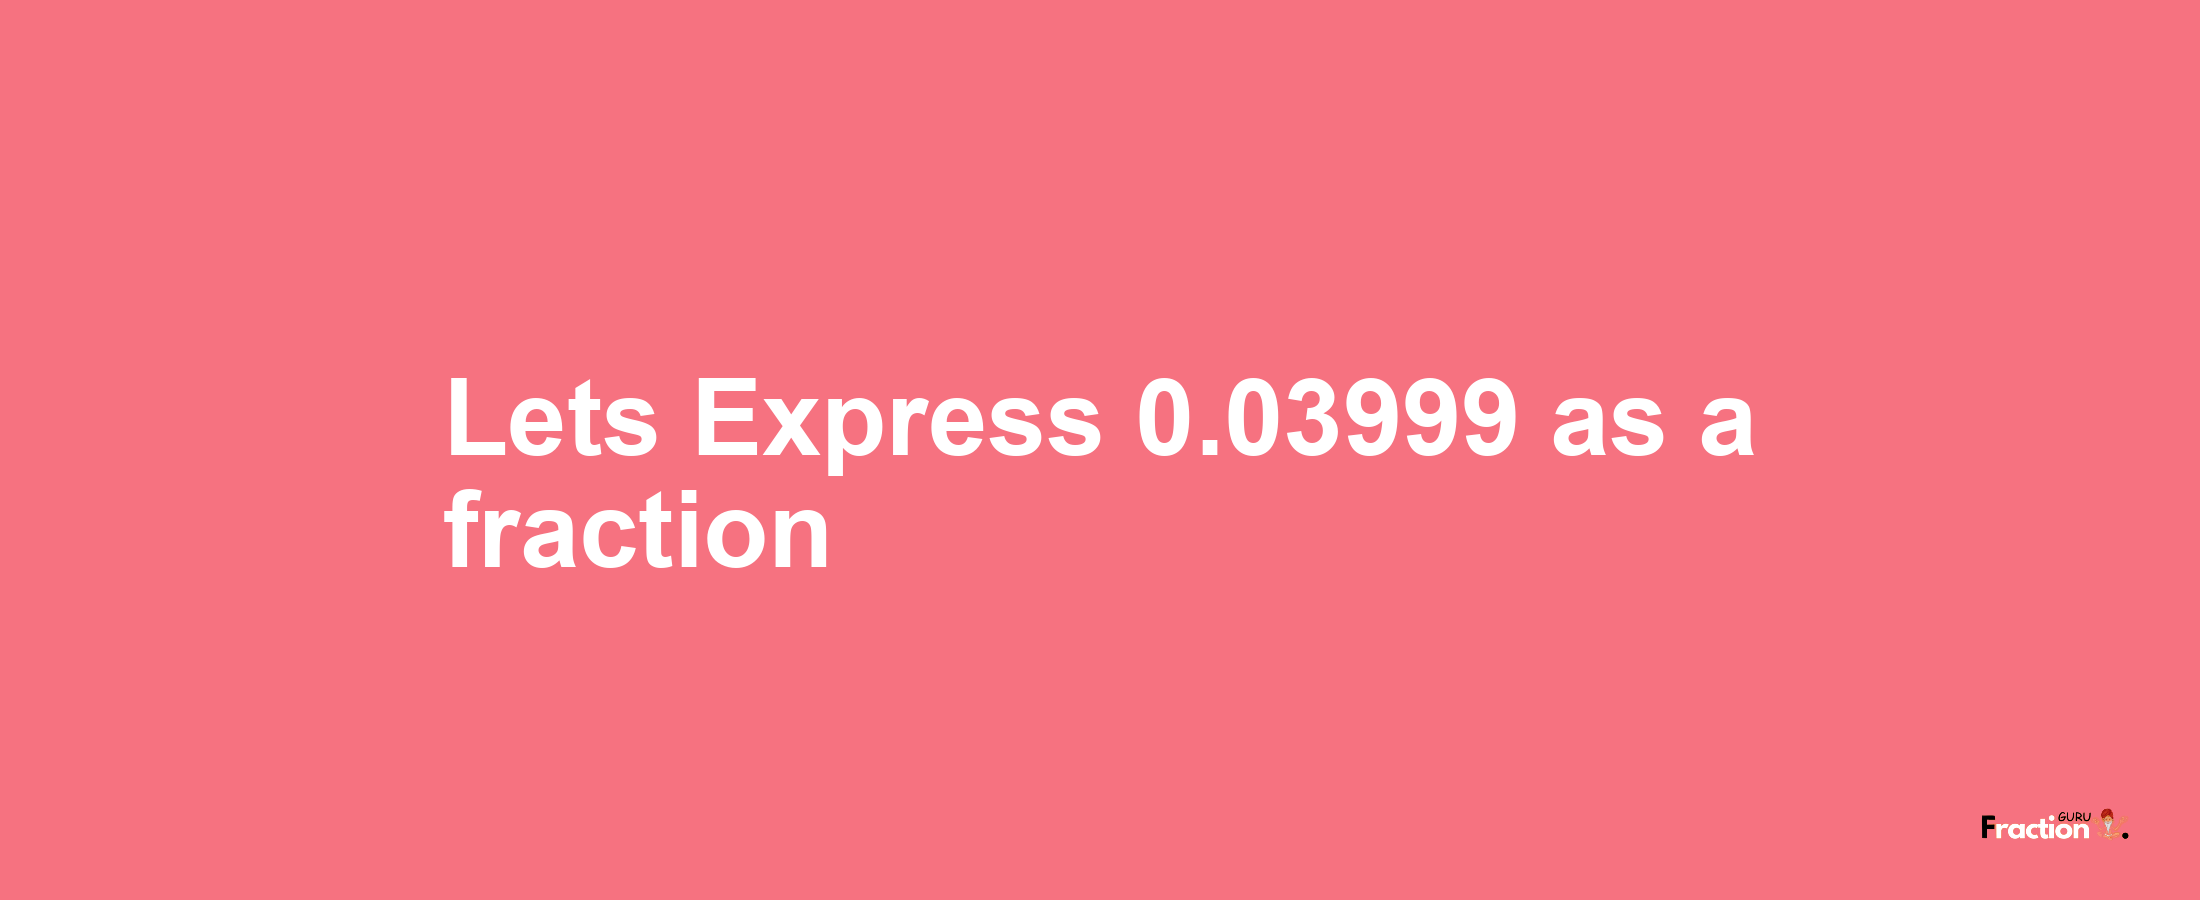 Lets Express 0.03999 as afraction